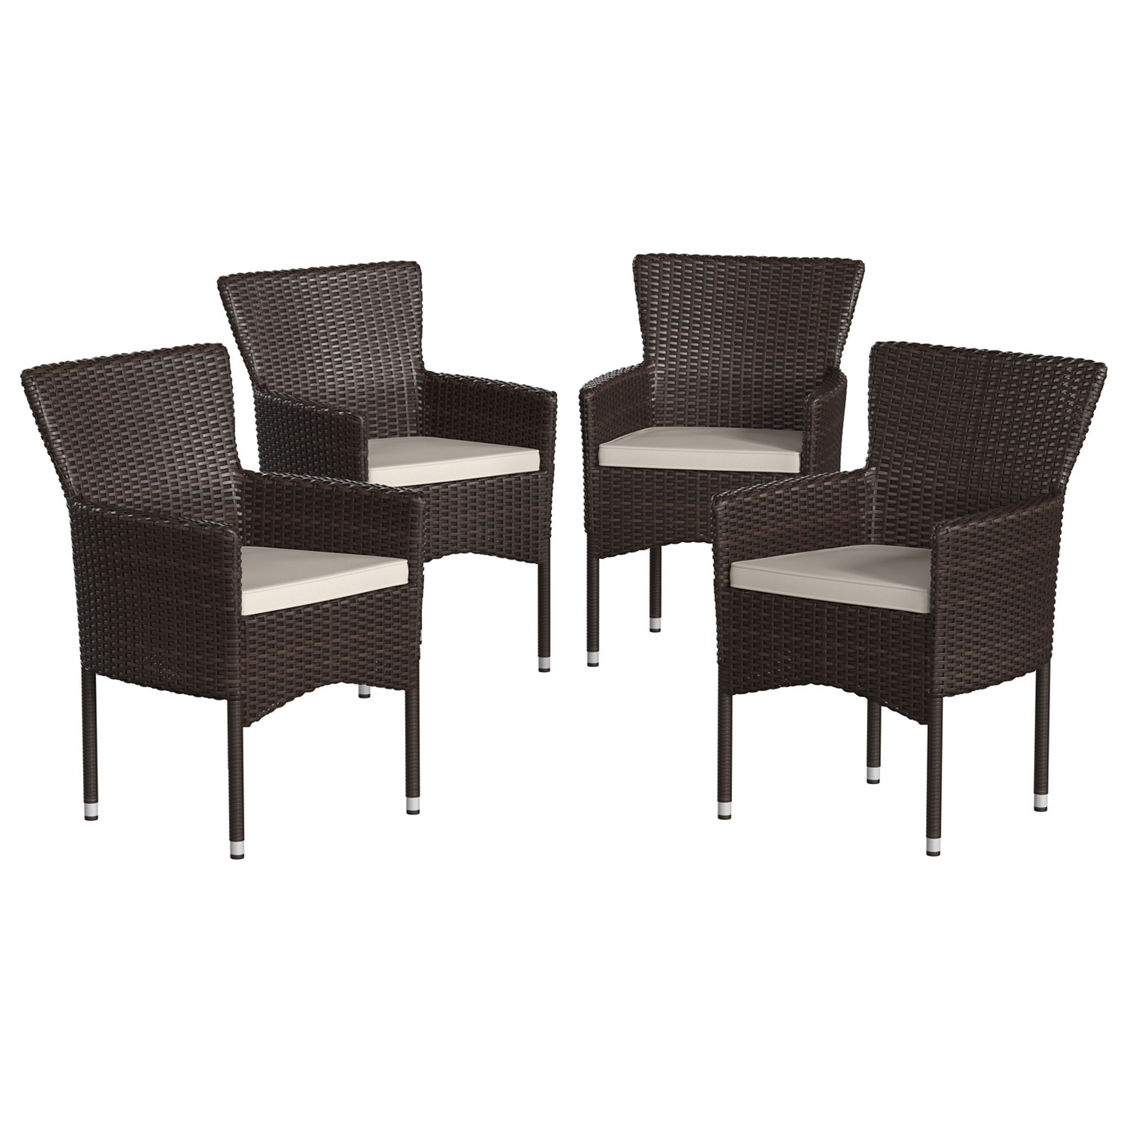 Flash Furniture 4PK Wicker Patio Chairs & Cushions - Image 5 of 5